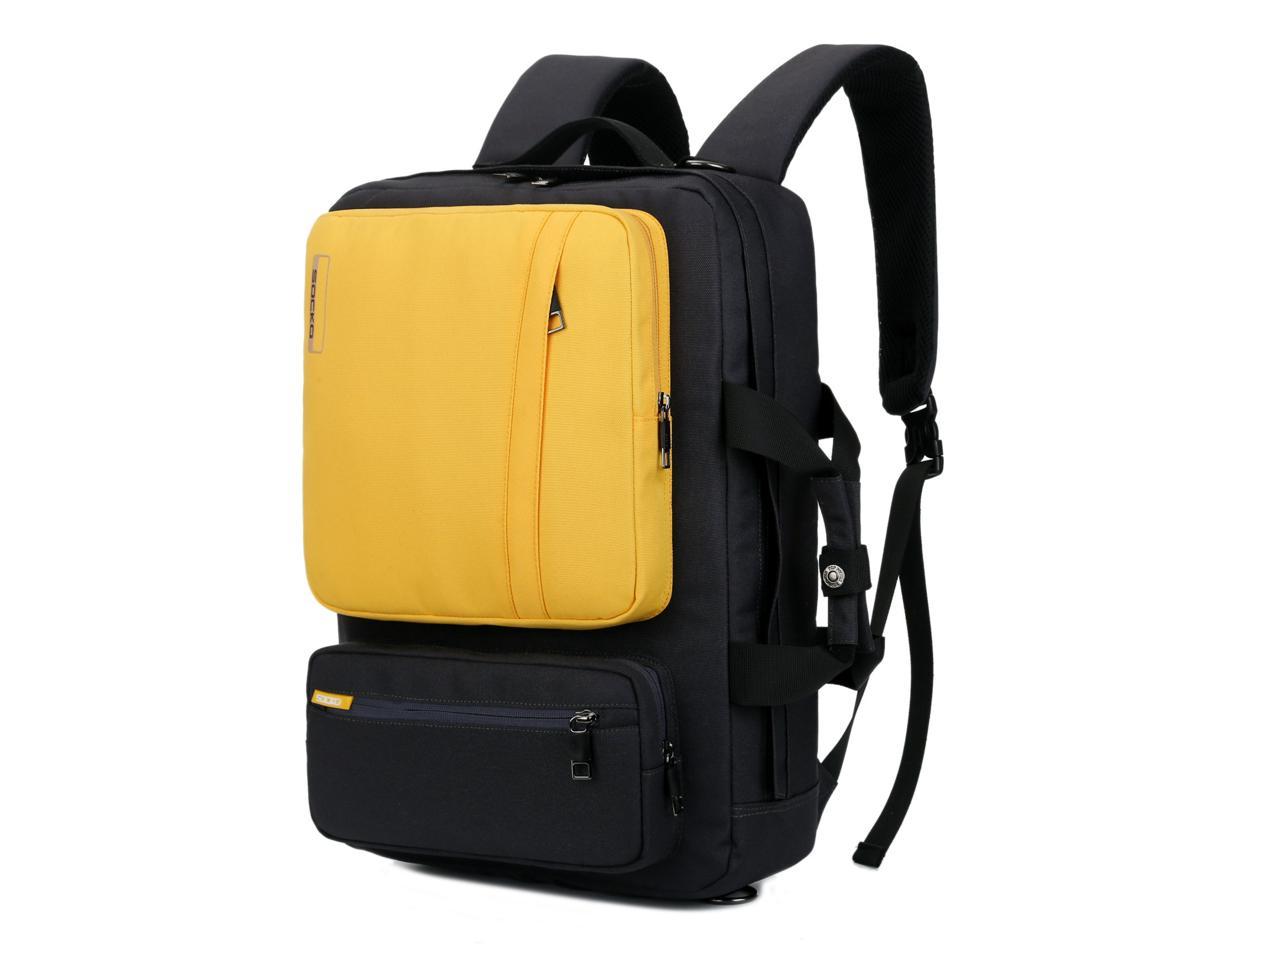 SOCKO 17 Inch Laptop Backpack with Side Handle and Shoulder Strap ...